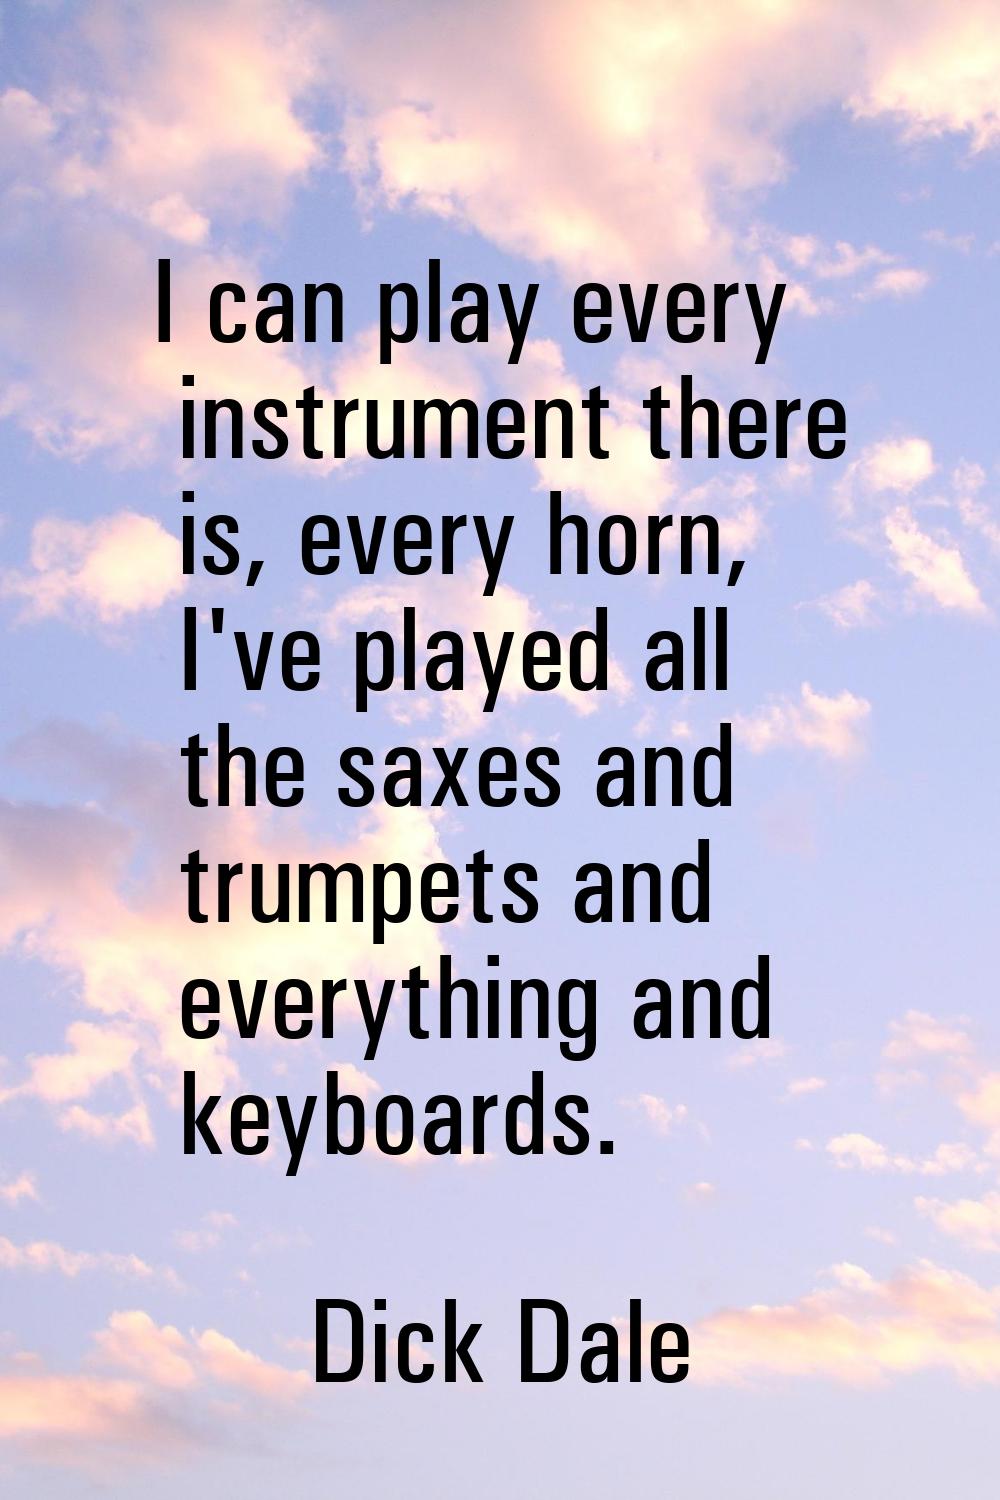 I can play every instrument there is, every horn, I've played all the saxes and trumpets and everyt